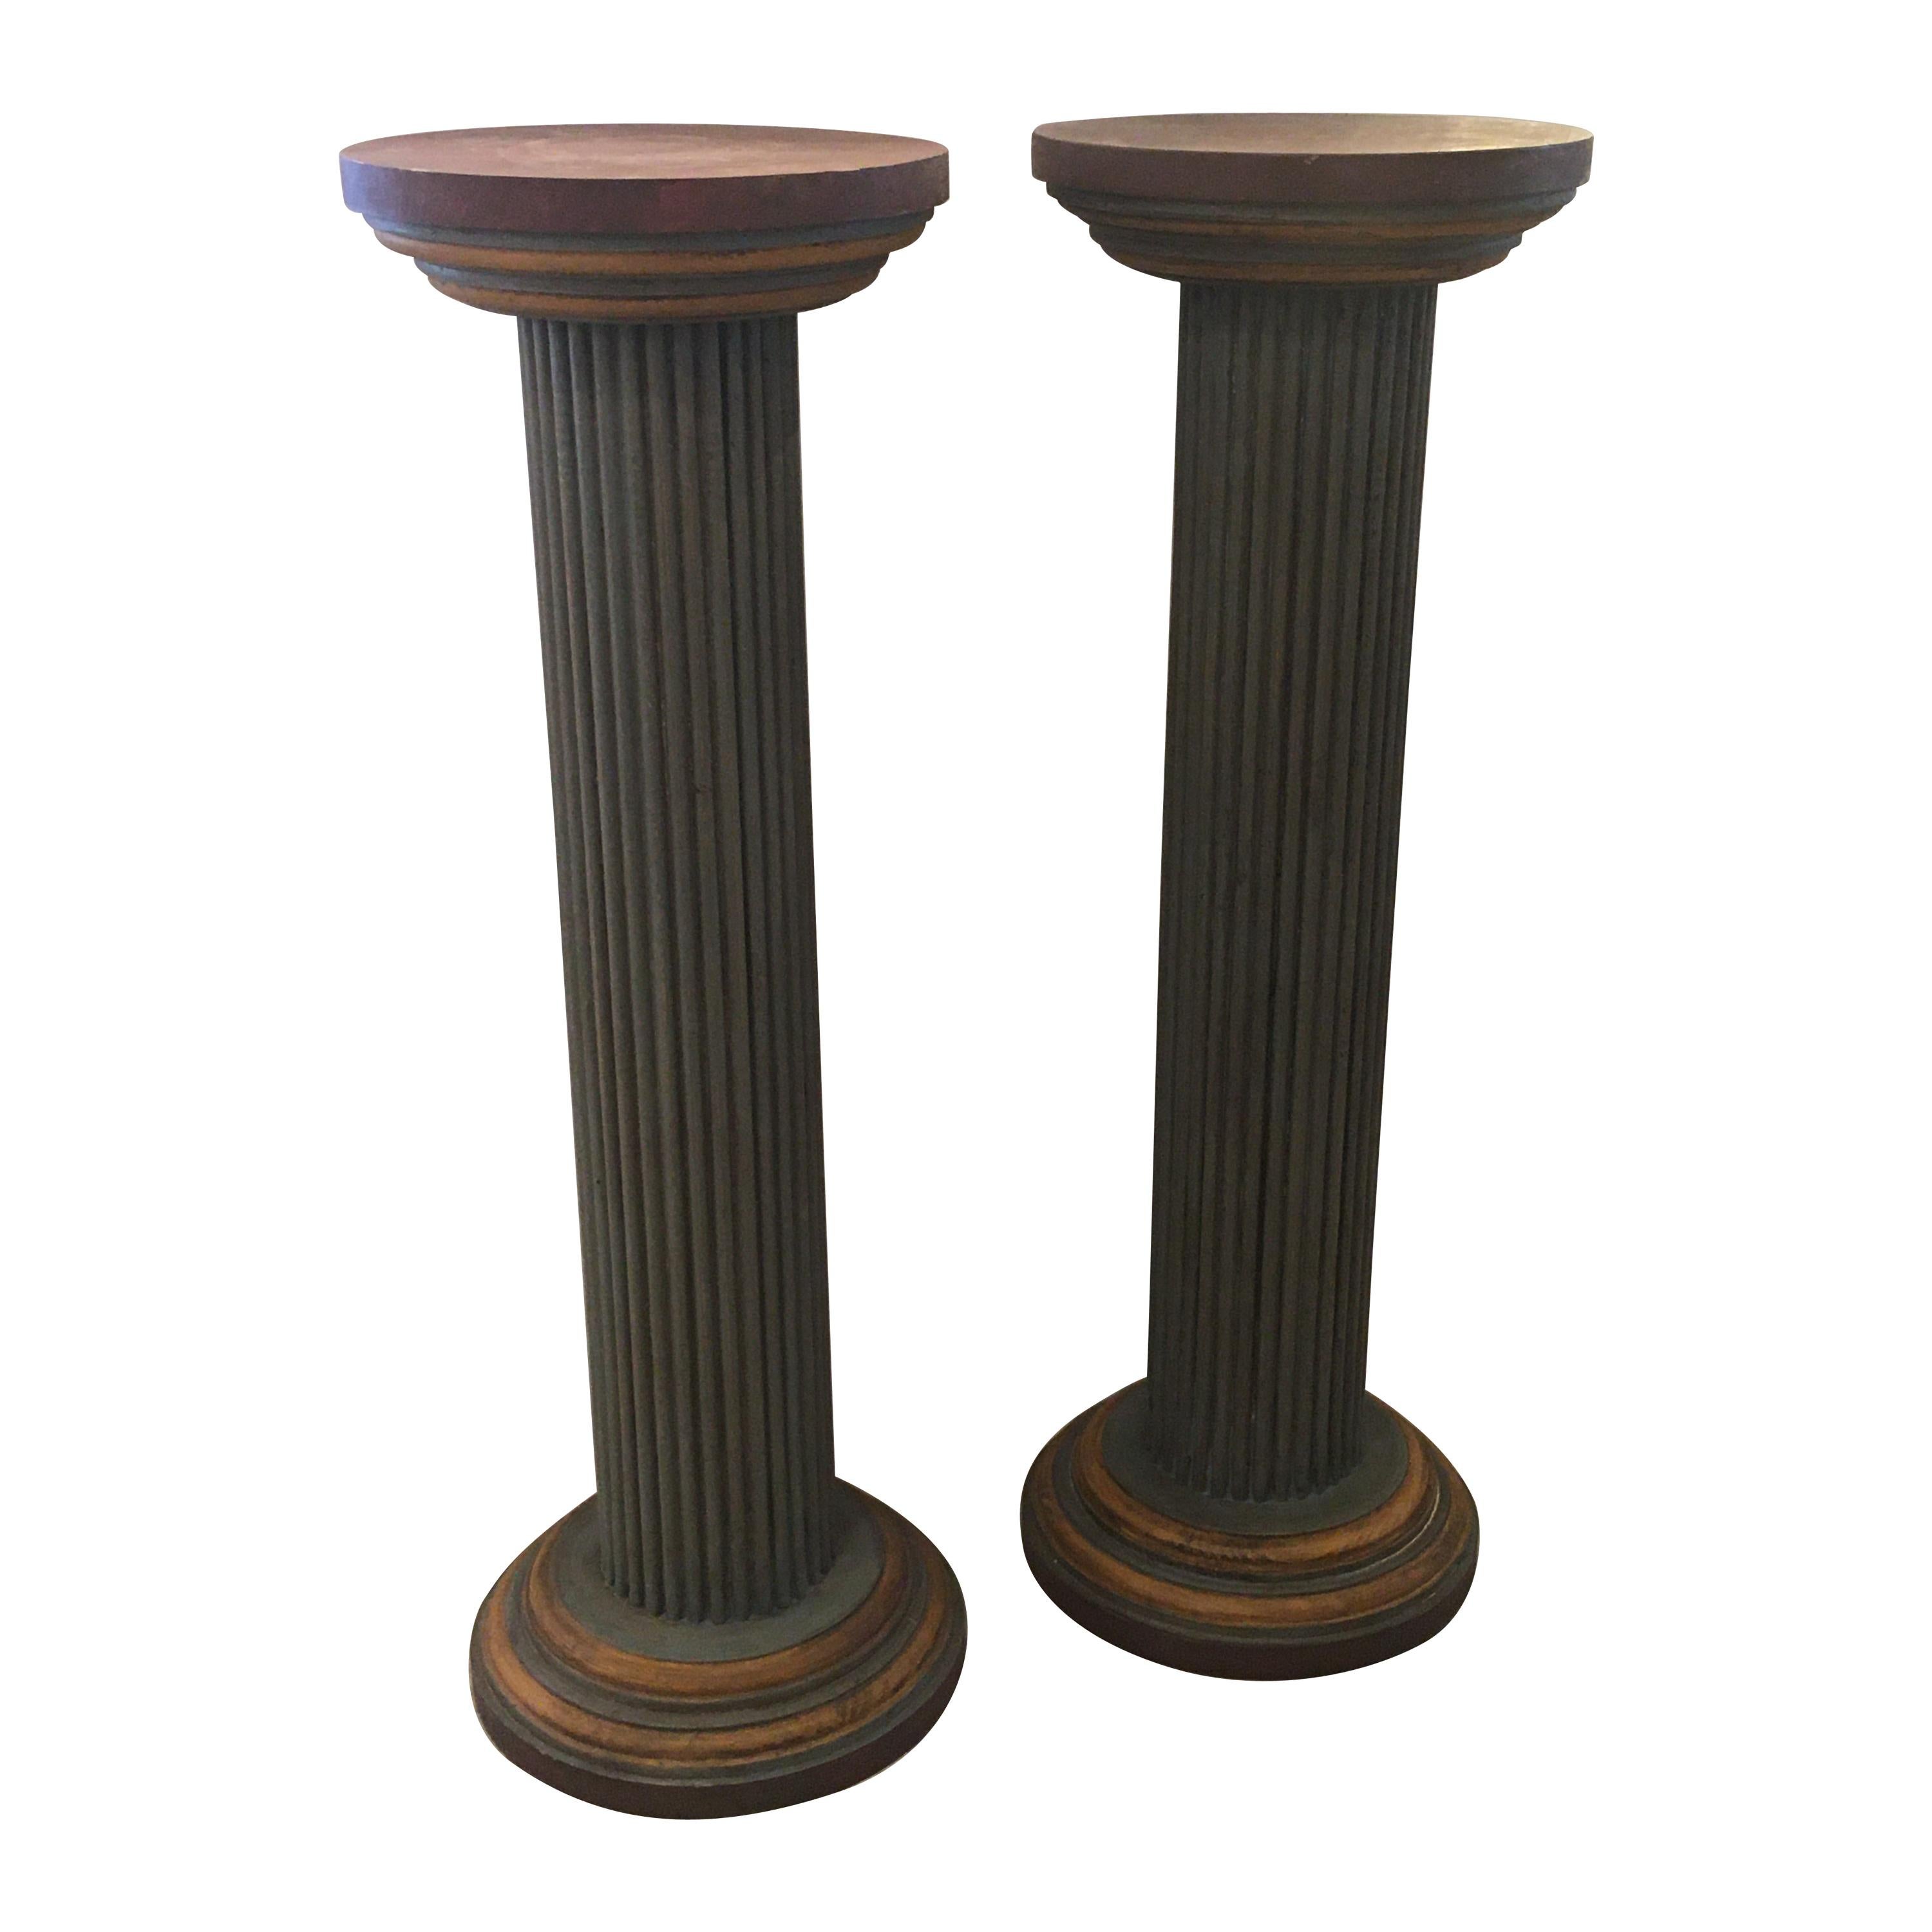 Pair of Muted Neoclassical Carved Wood Painted Architectural Columns